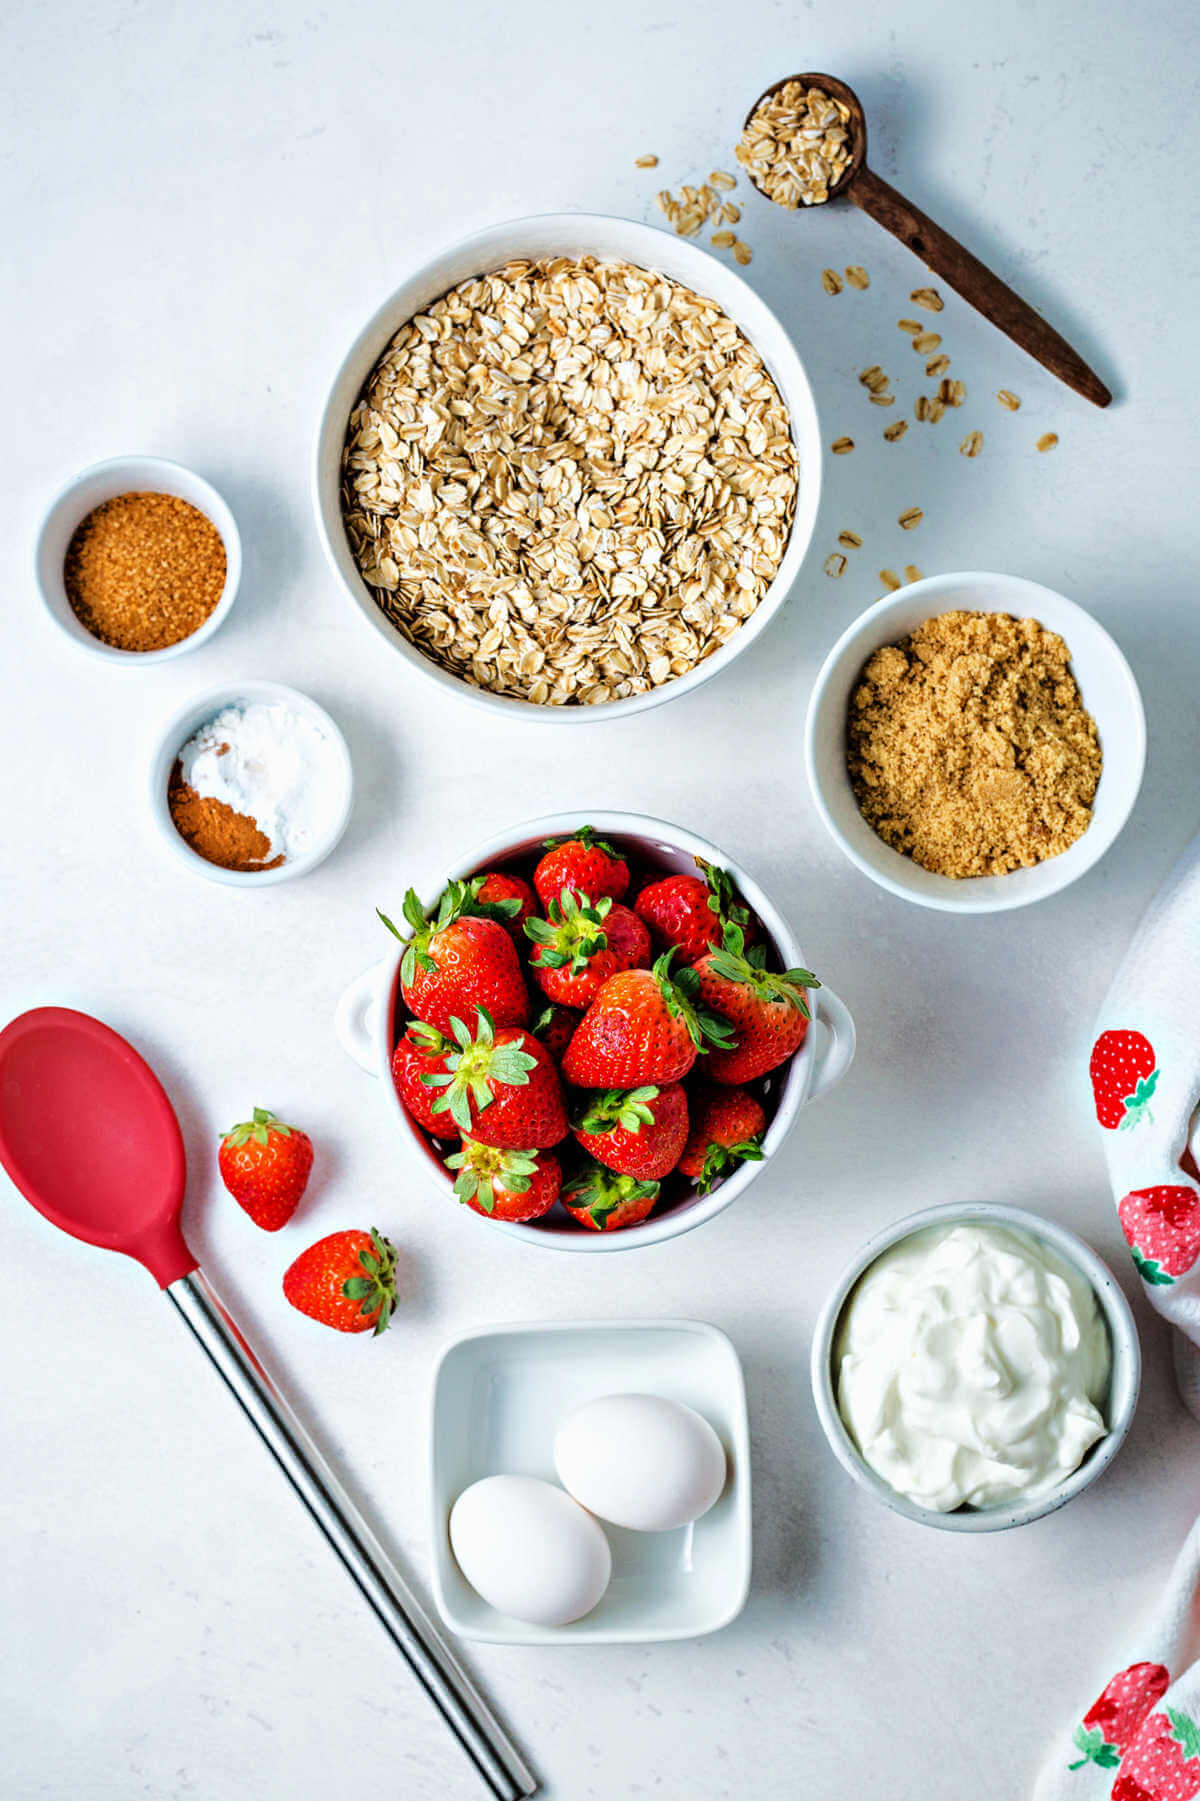 ingredients for strawberry oat muffins on a table.